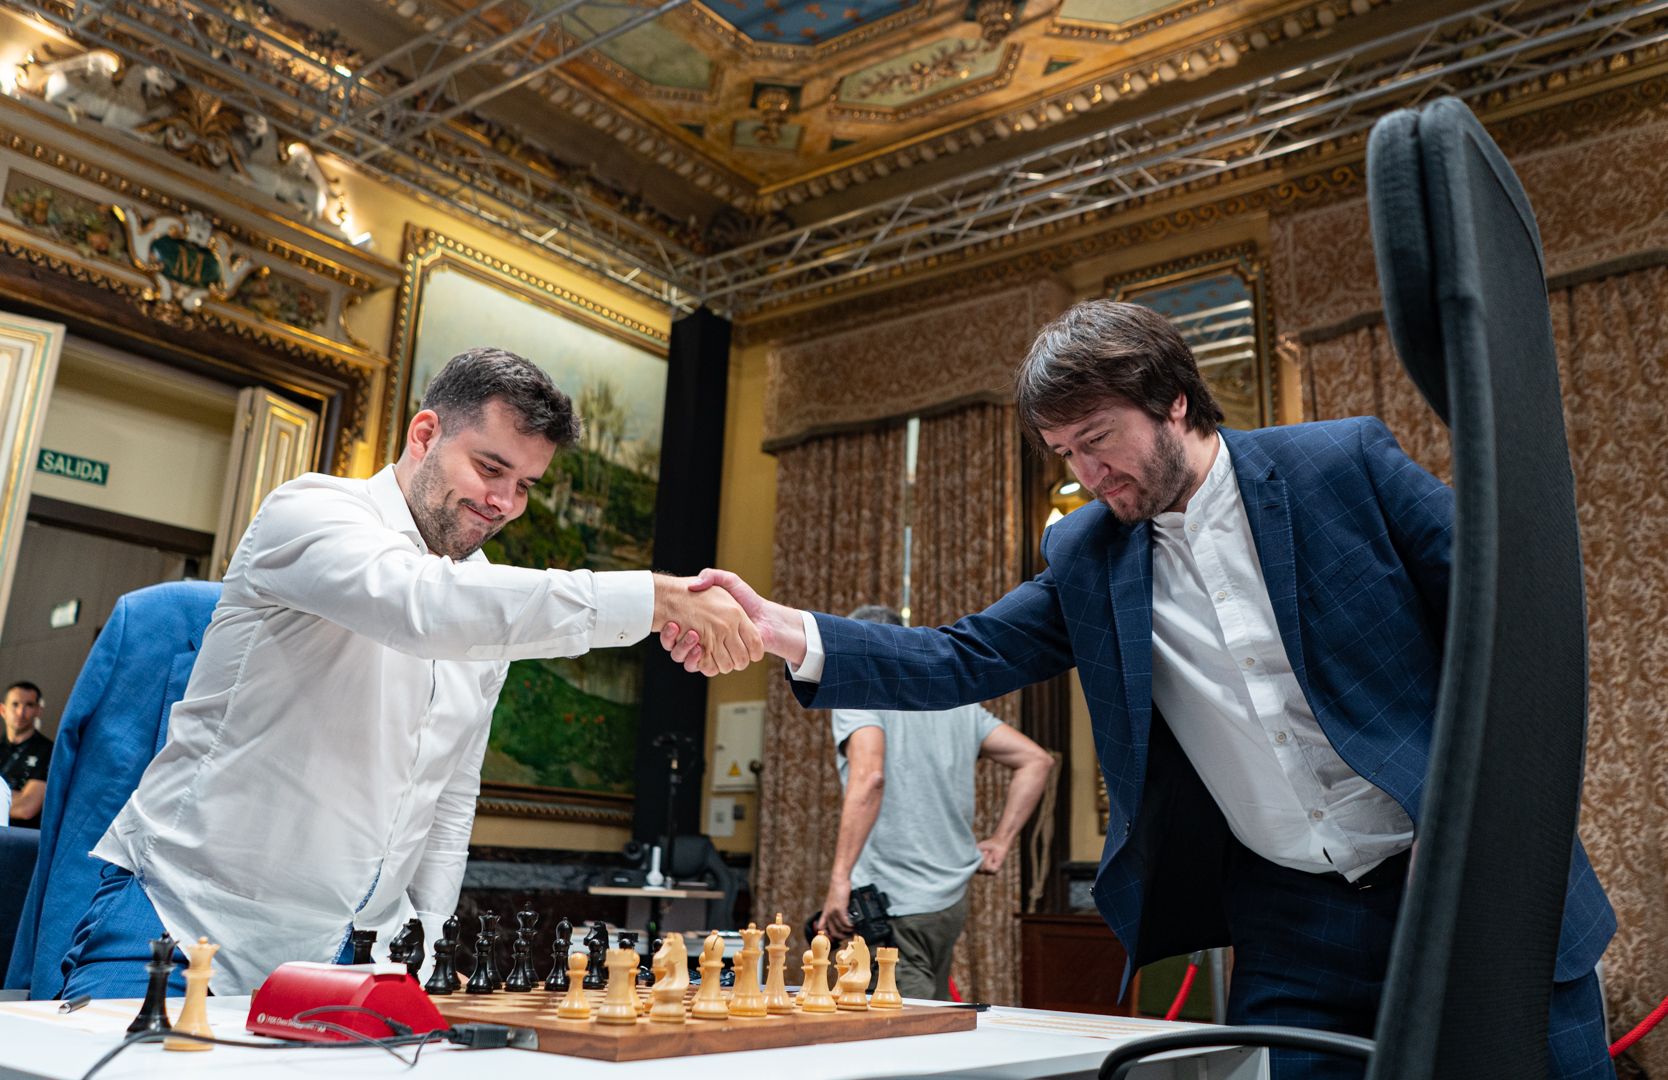 The interplay of talent and practice in chess (ChessTech News)